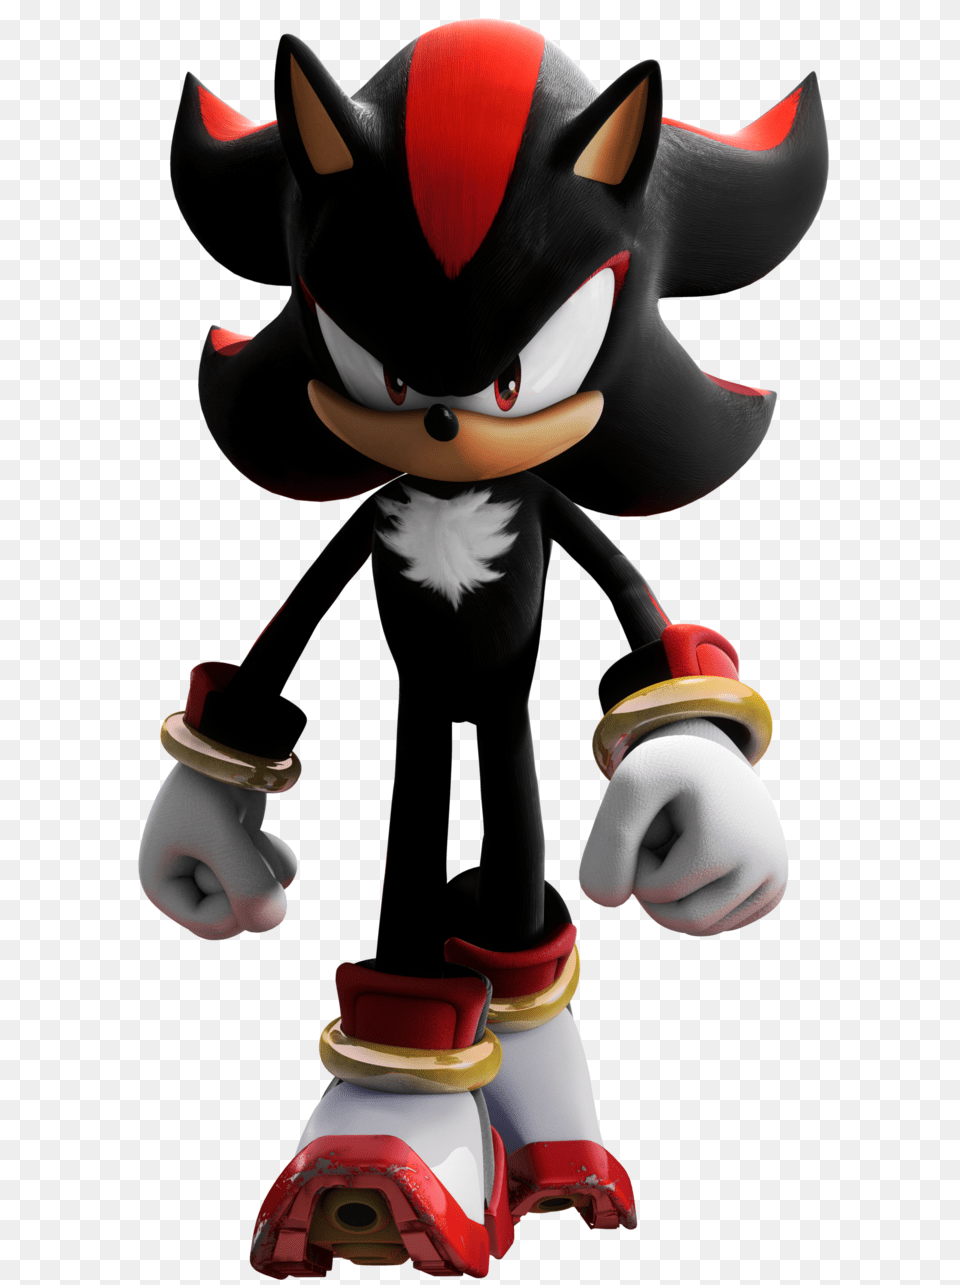 Toy Png Image